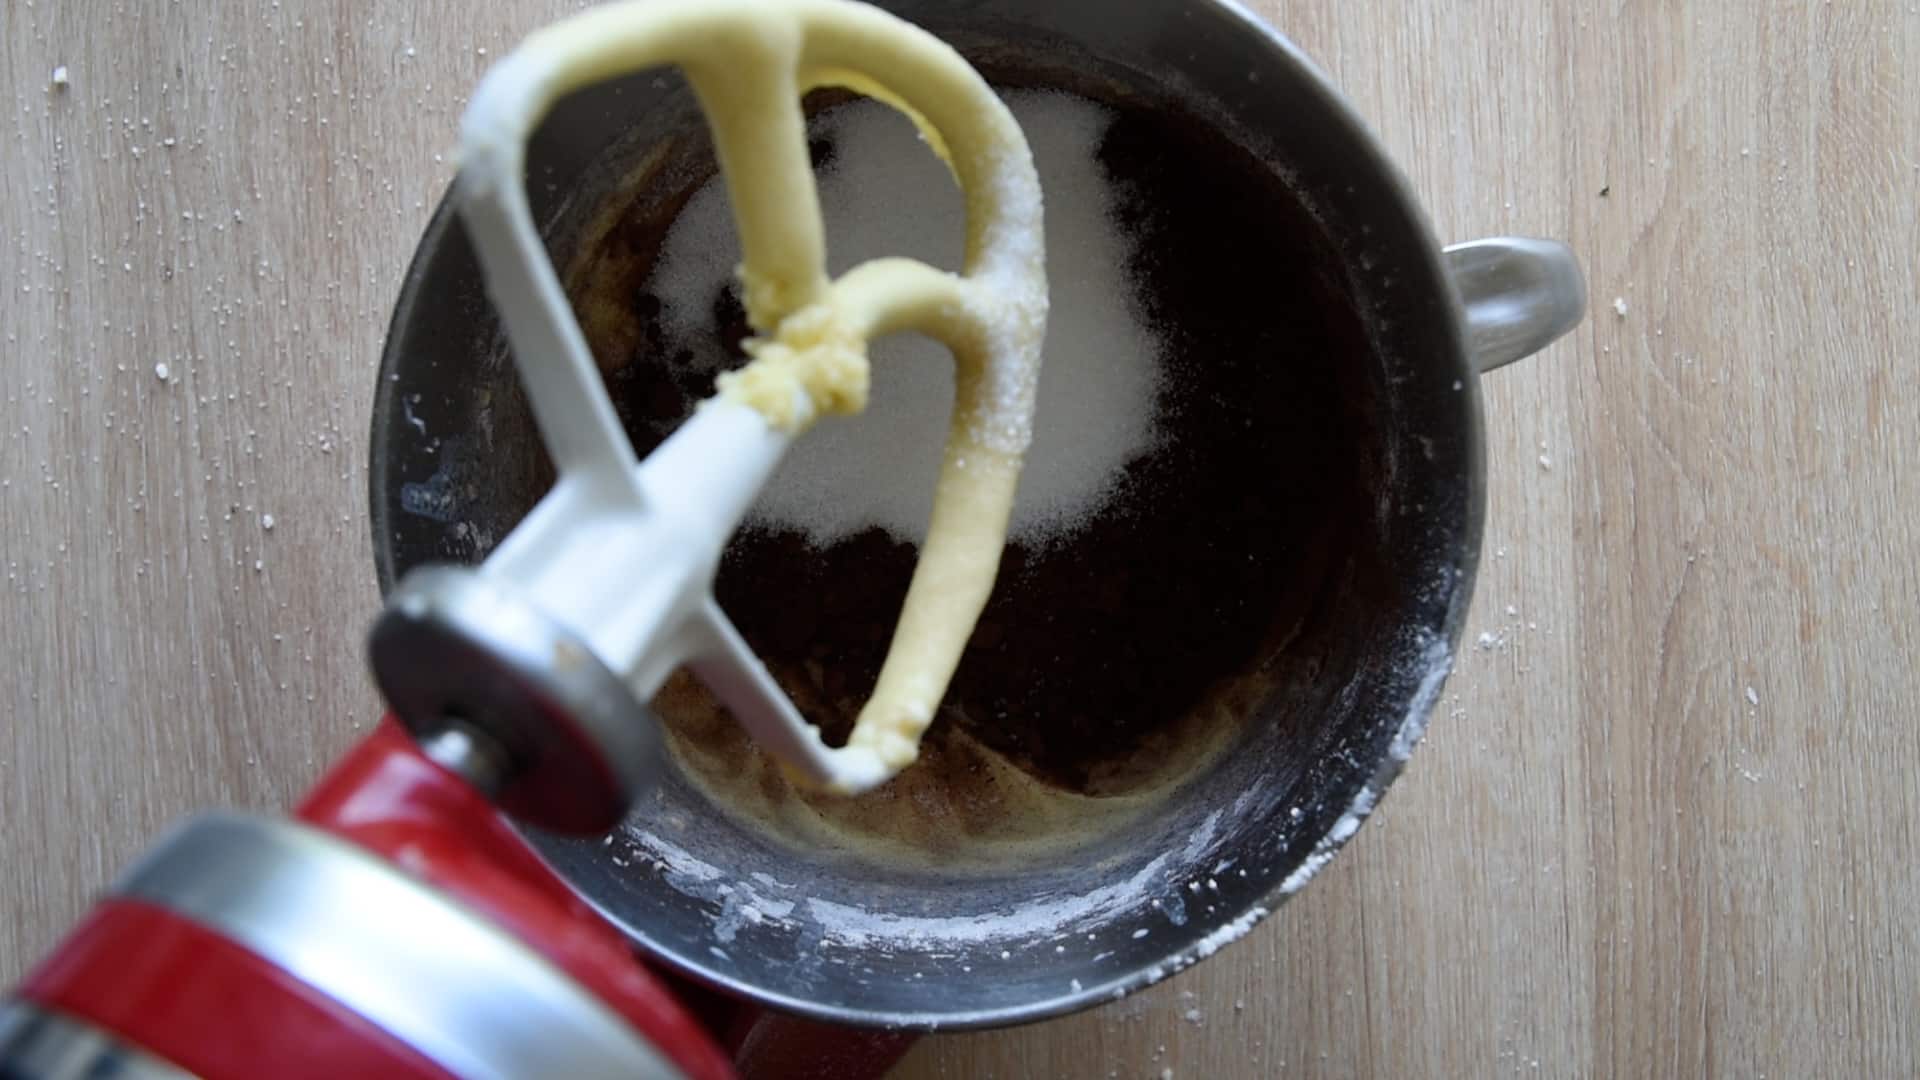 Add sugar and cocoa to the other half of the batter